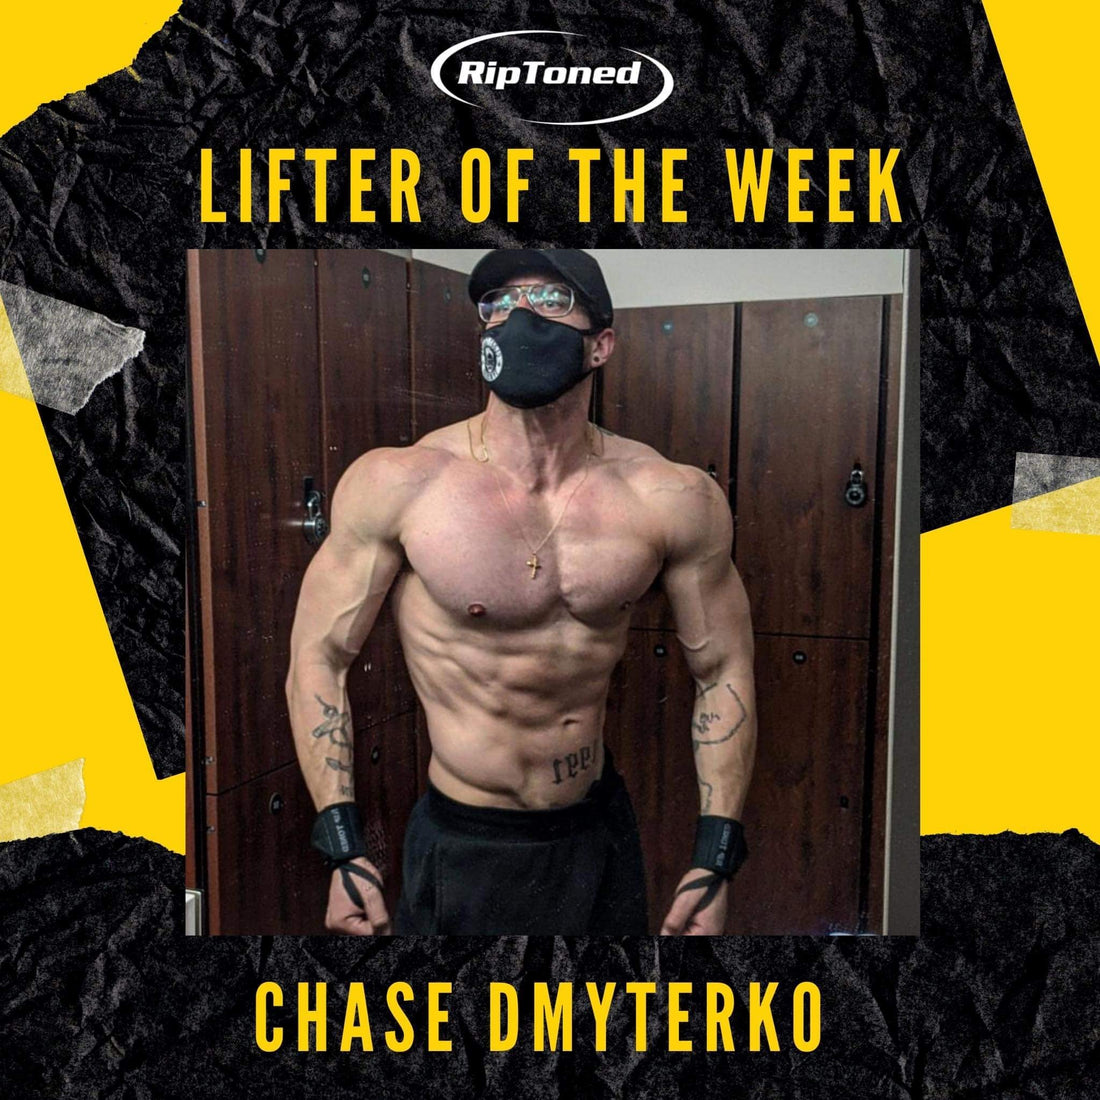 Lifter of the Week - Chase Dmyterko - Rip Toned